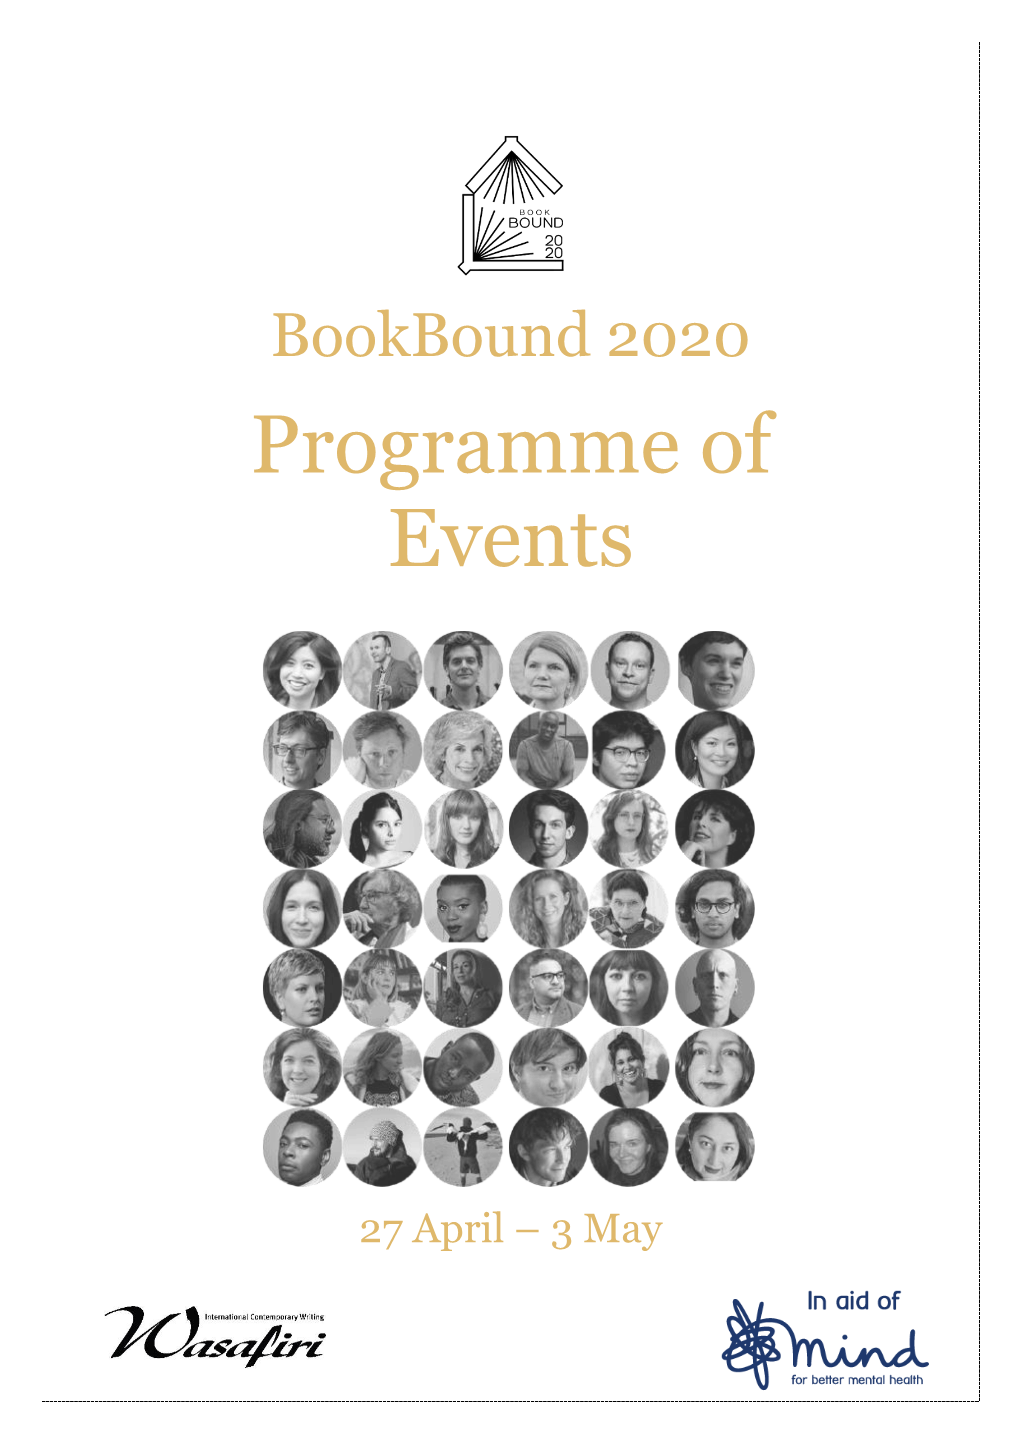 Bookbound 2020 Programme of Events